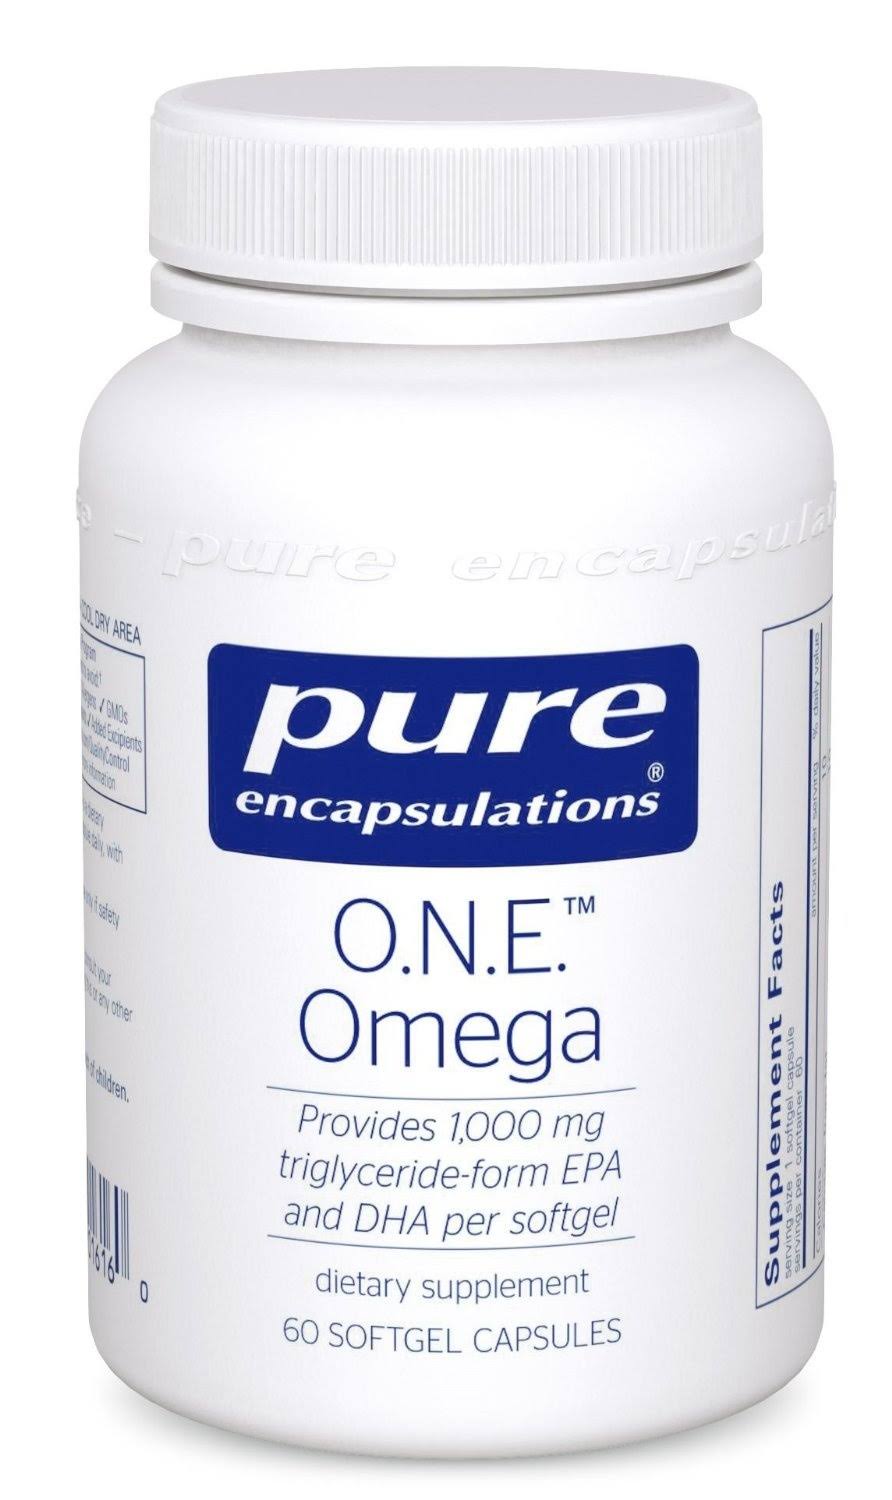 Pure Encapsulations One Omega Dietary Supplements - 60ct